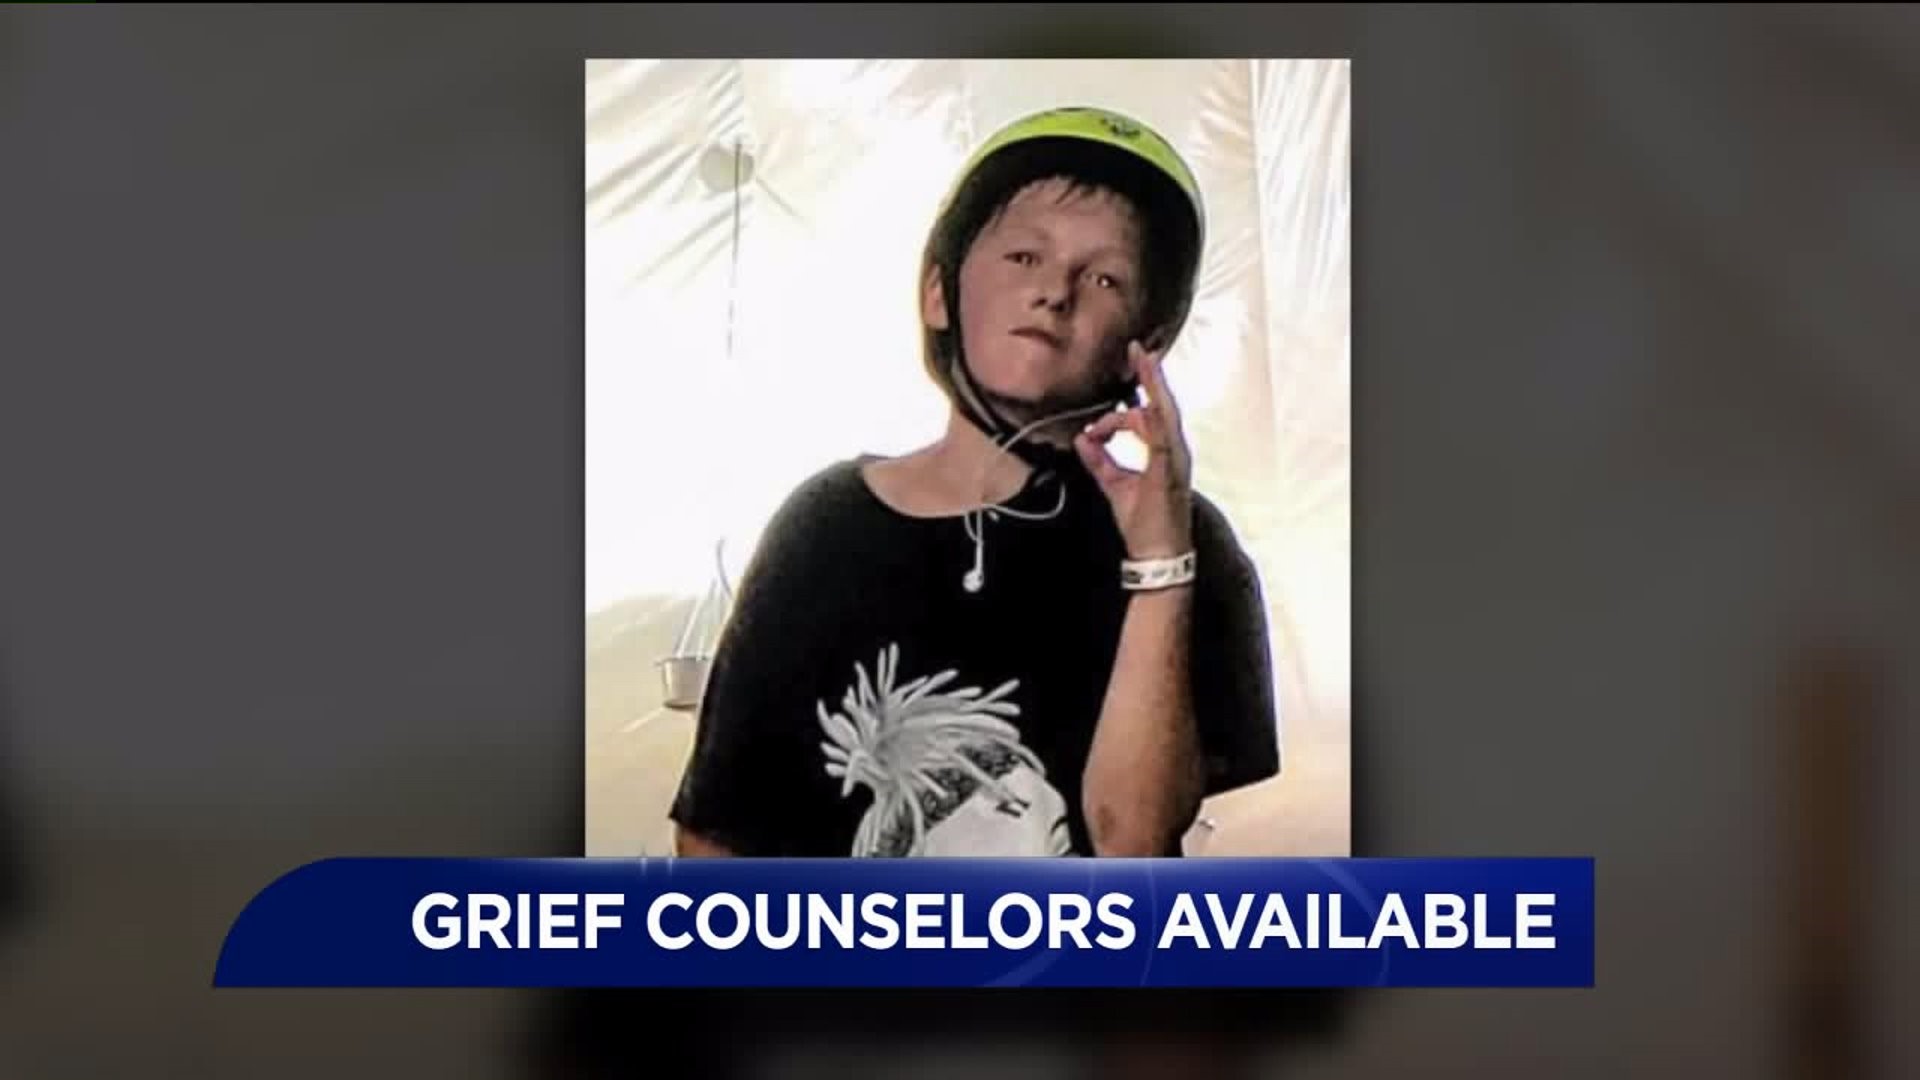 Grief Counselors Available at Elementary School Following Students Death